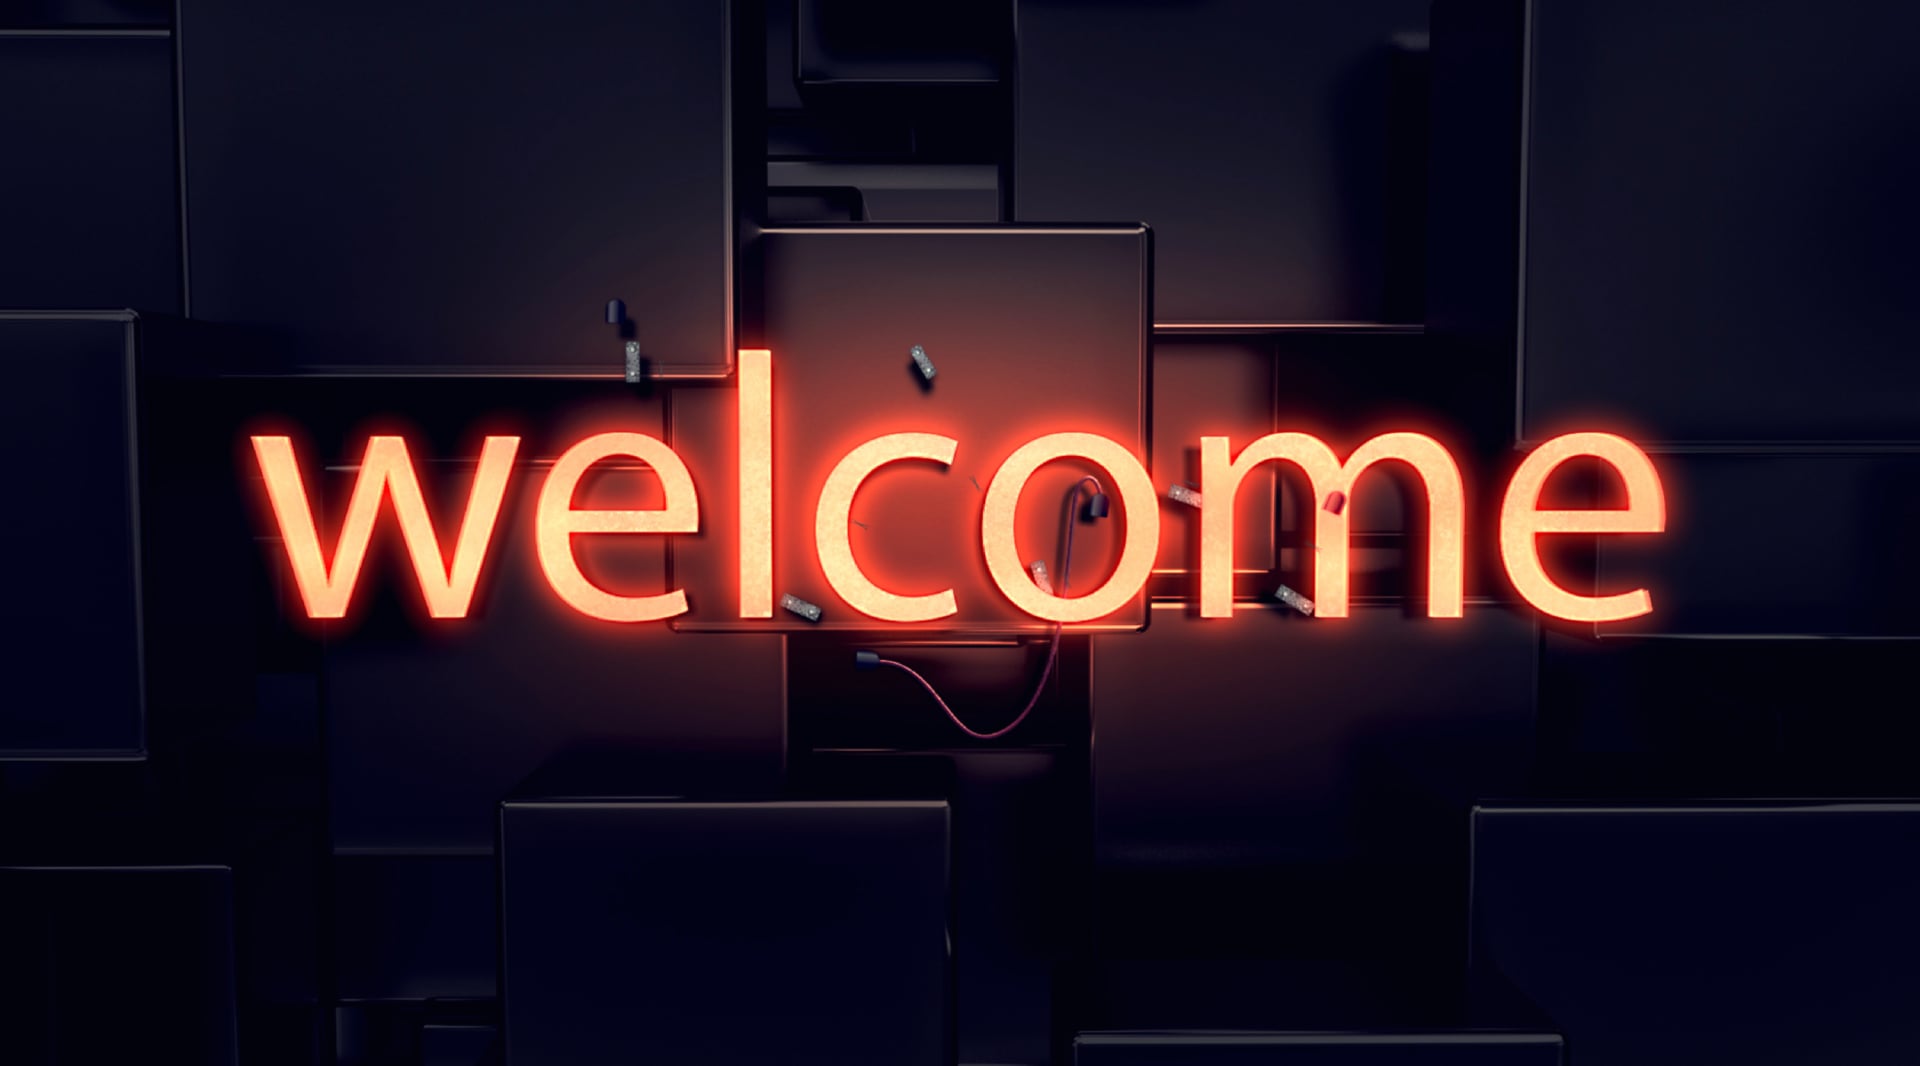 Digital Art Welcome wallpapers HD quality